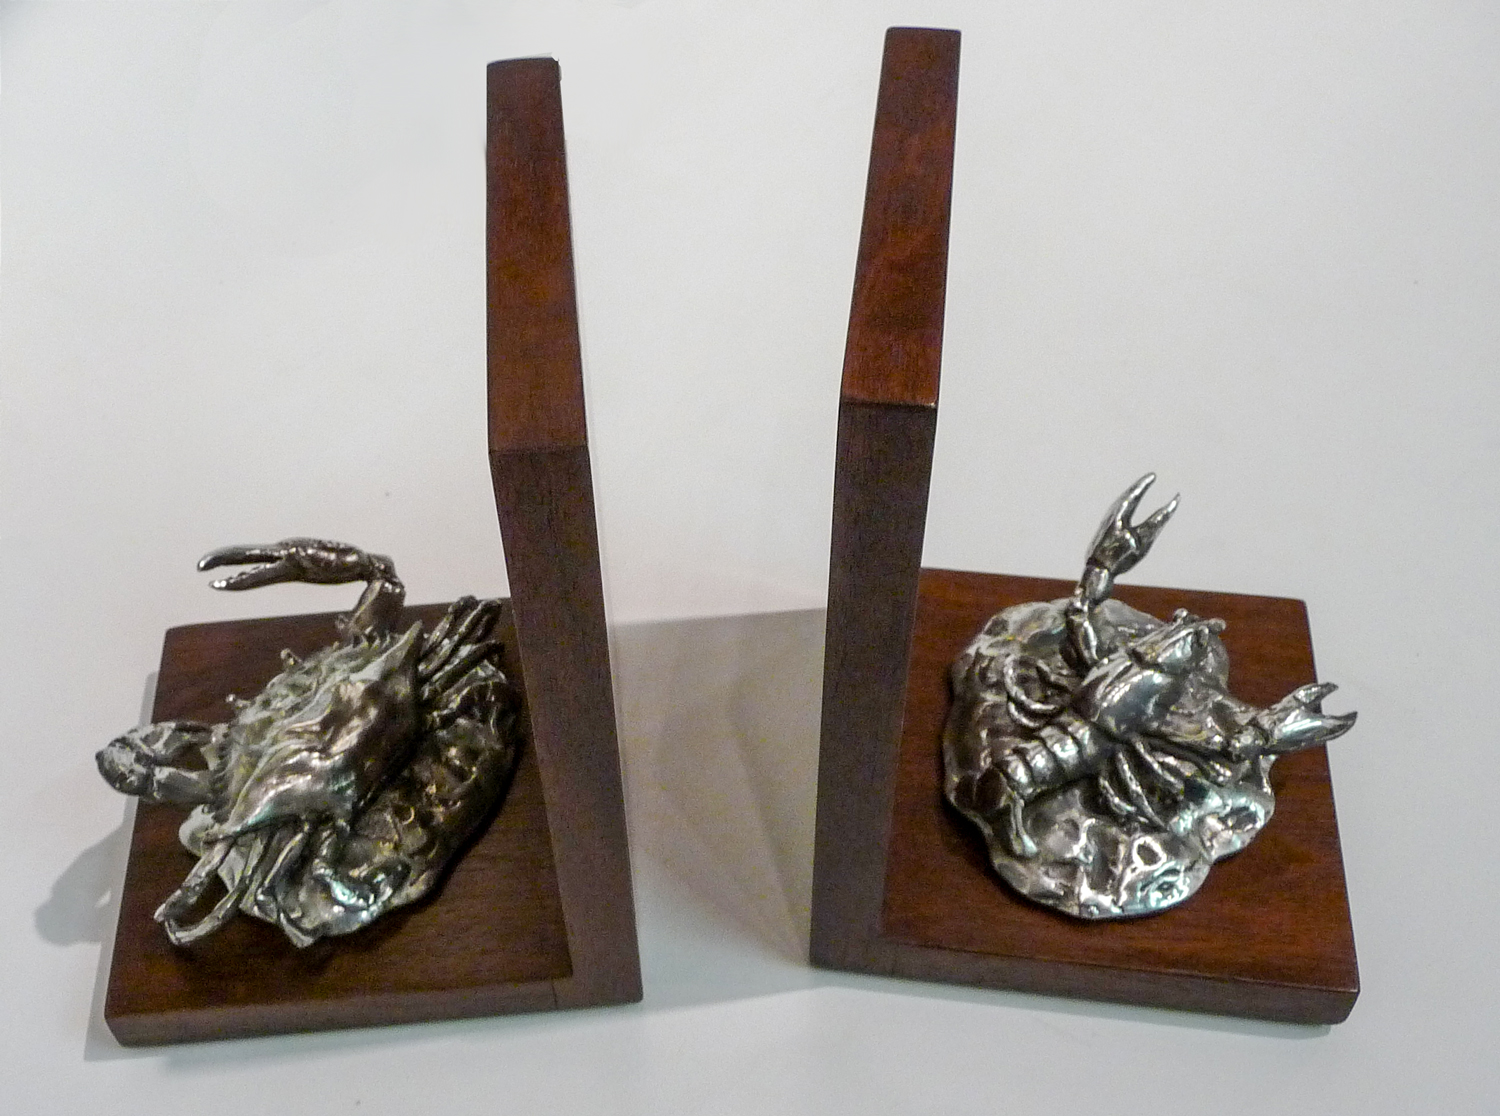 Second View of Bookends